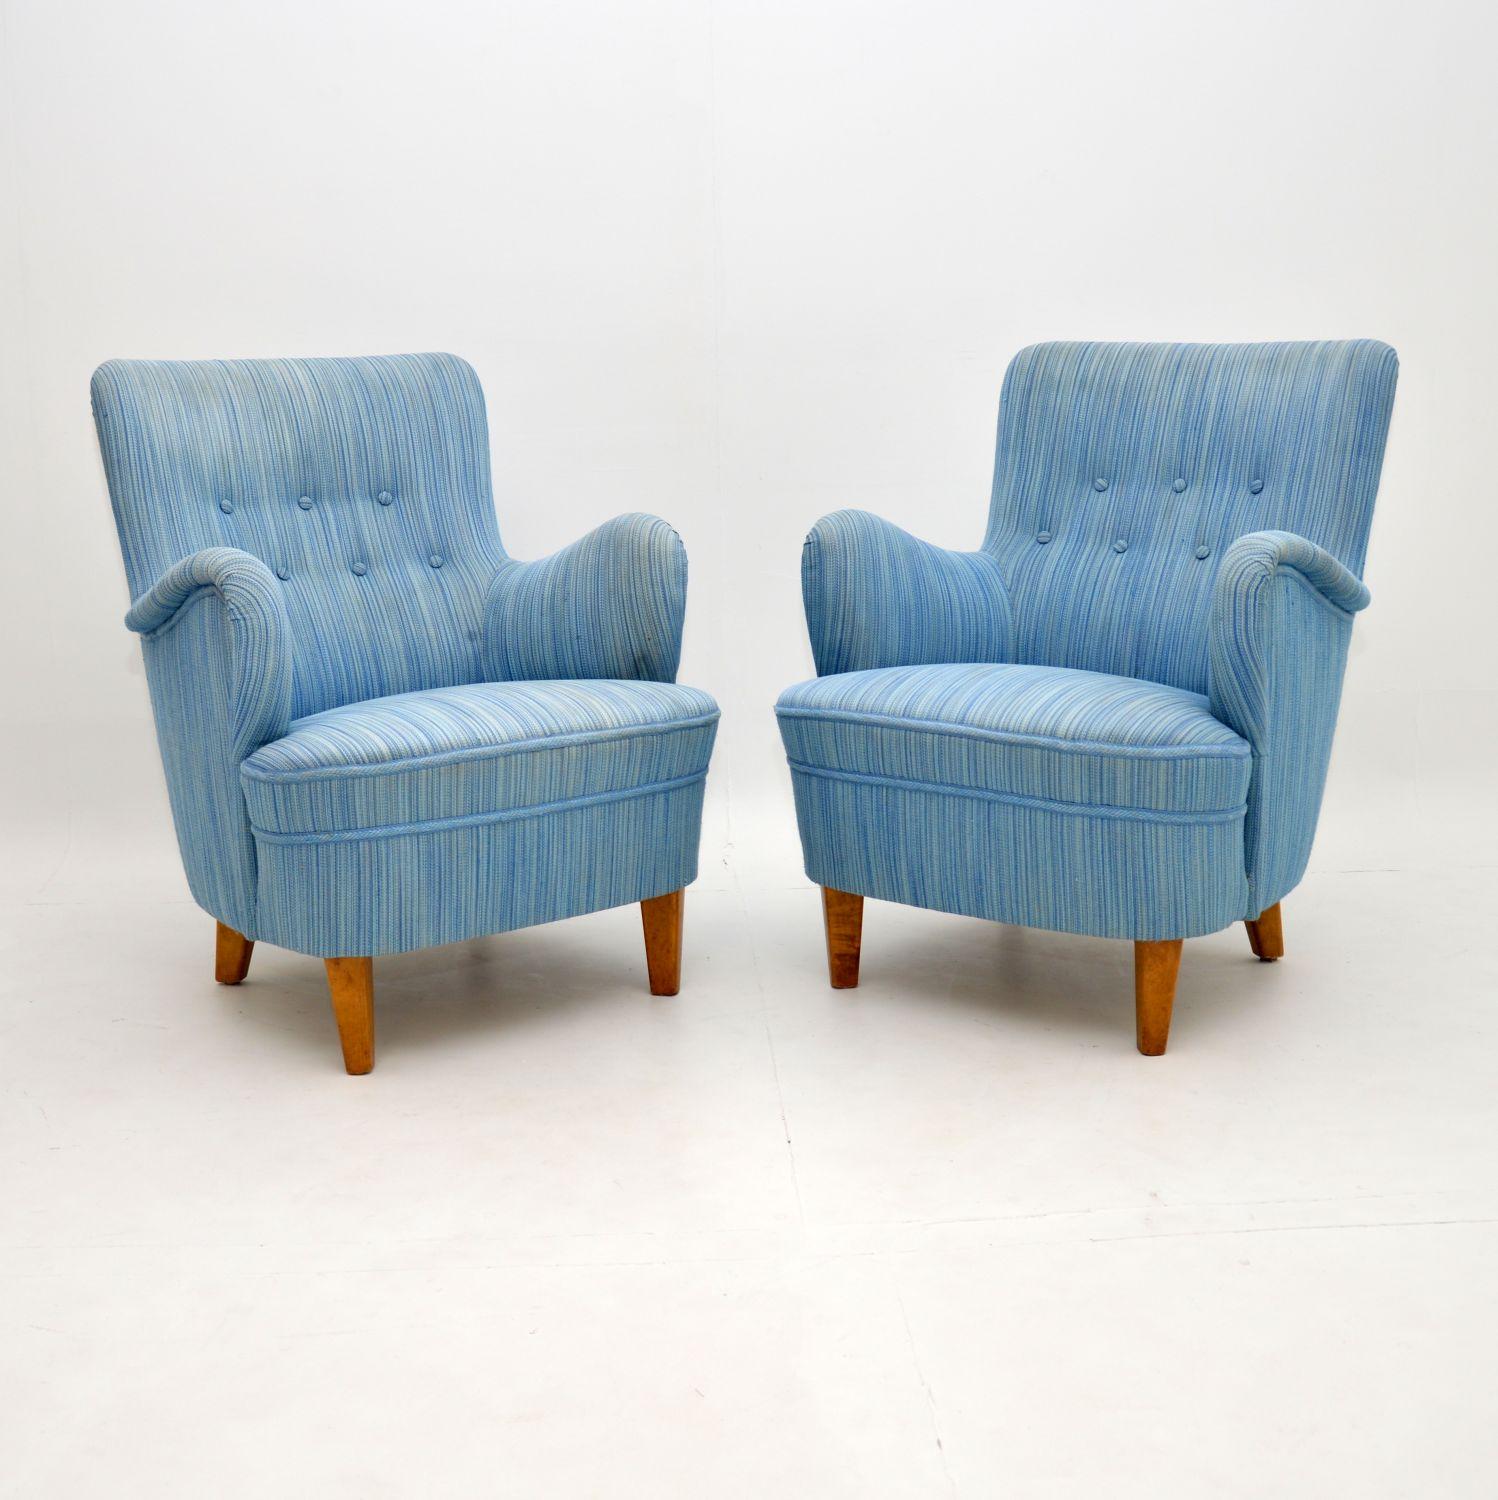 A stunning and very rare pair of vintage armchairs, designed by the great Carl Malmsten. These were made in Sweden, they date from the 1960’s.

They are of amazing quality and are extremely comfortable. They sit on solid satin birch legs, and are